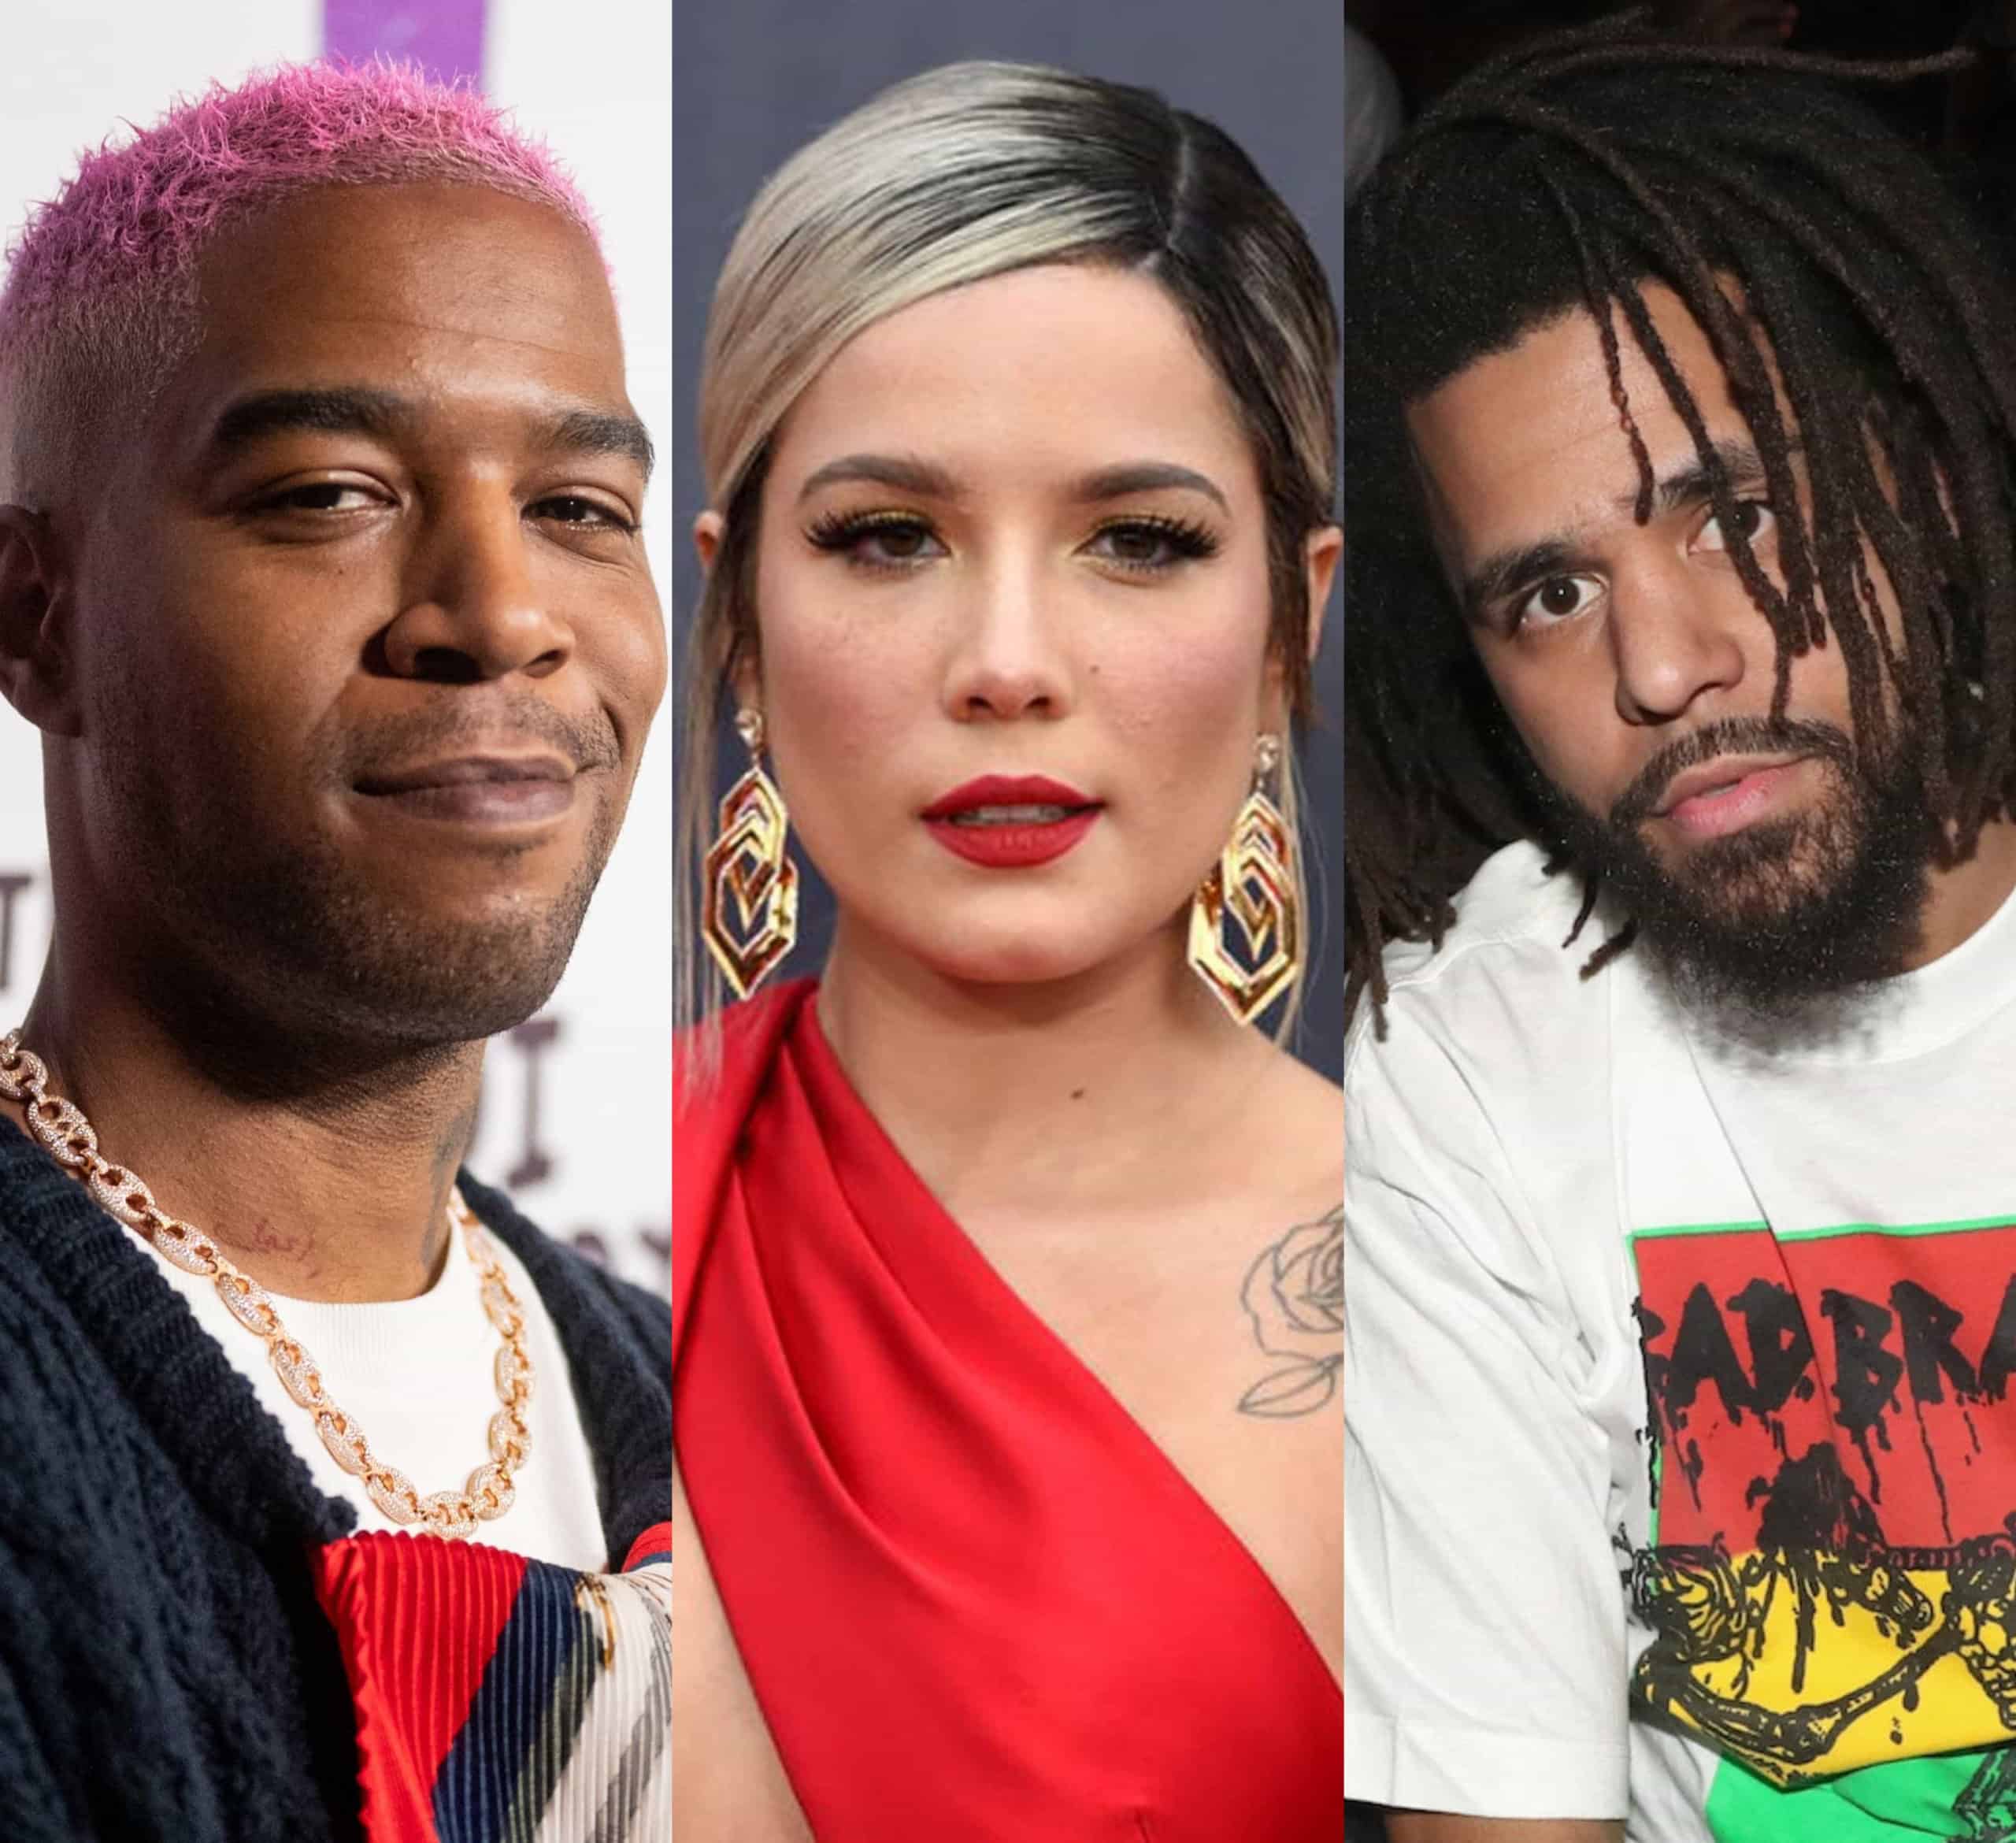 Kid Cudi, Halsey & J. Cole To Headline The Governors Ball 2022 Festival